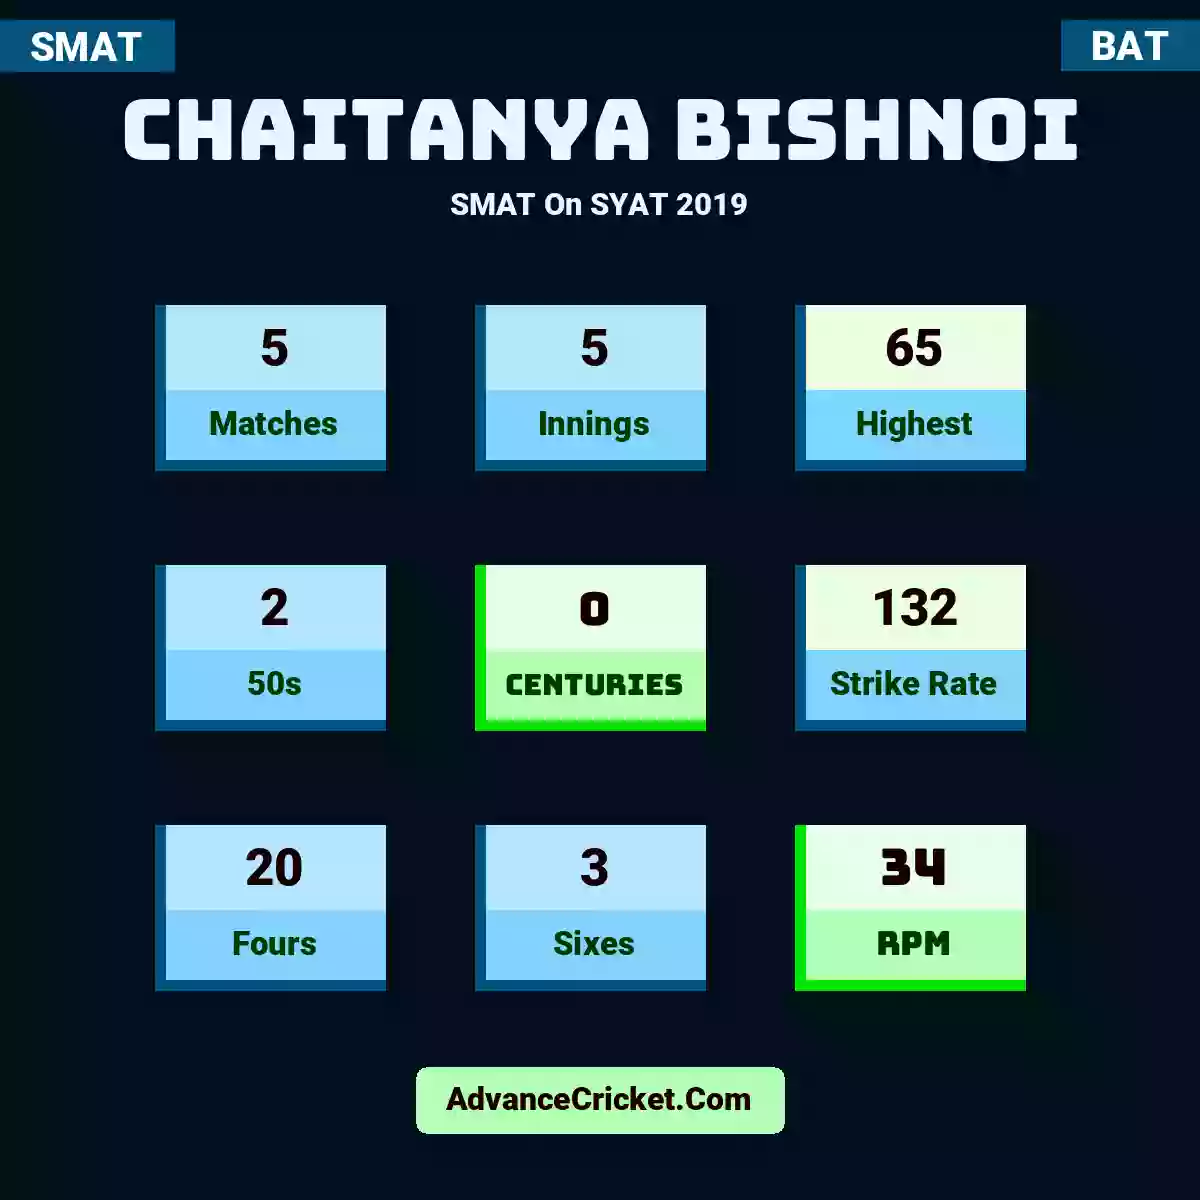 Chaitanya Bishnoi SMAT  On SYAT 2019, Chaitanya Bishnoi played 5 matches, scored 65 runs as highest, 2 half-centuries, and 0 centuries, with a strike rate of 132. C.Bishnoi hit 20 fours and 3 sixes, with an RPM of 34.